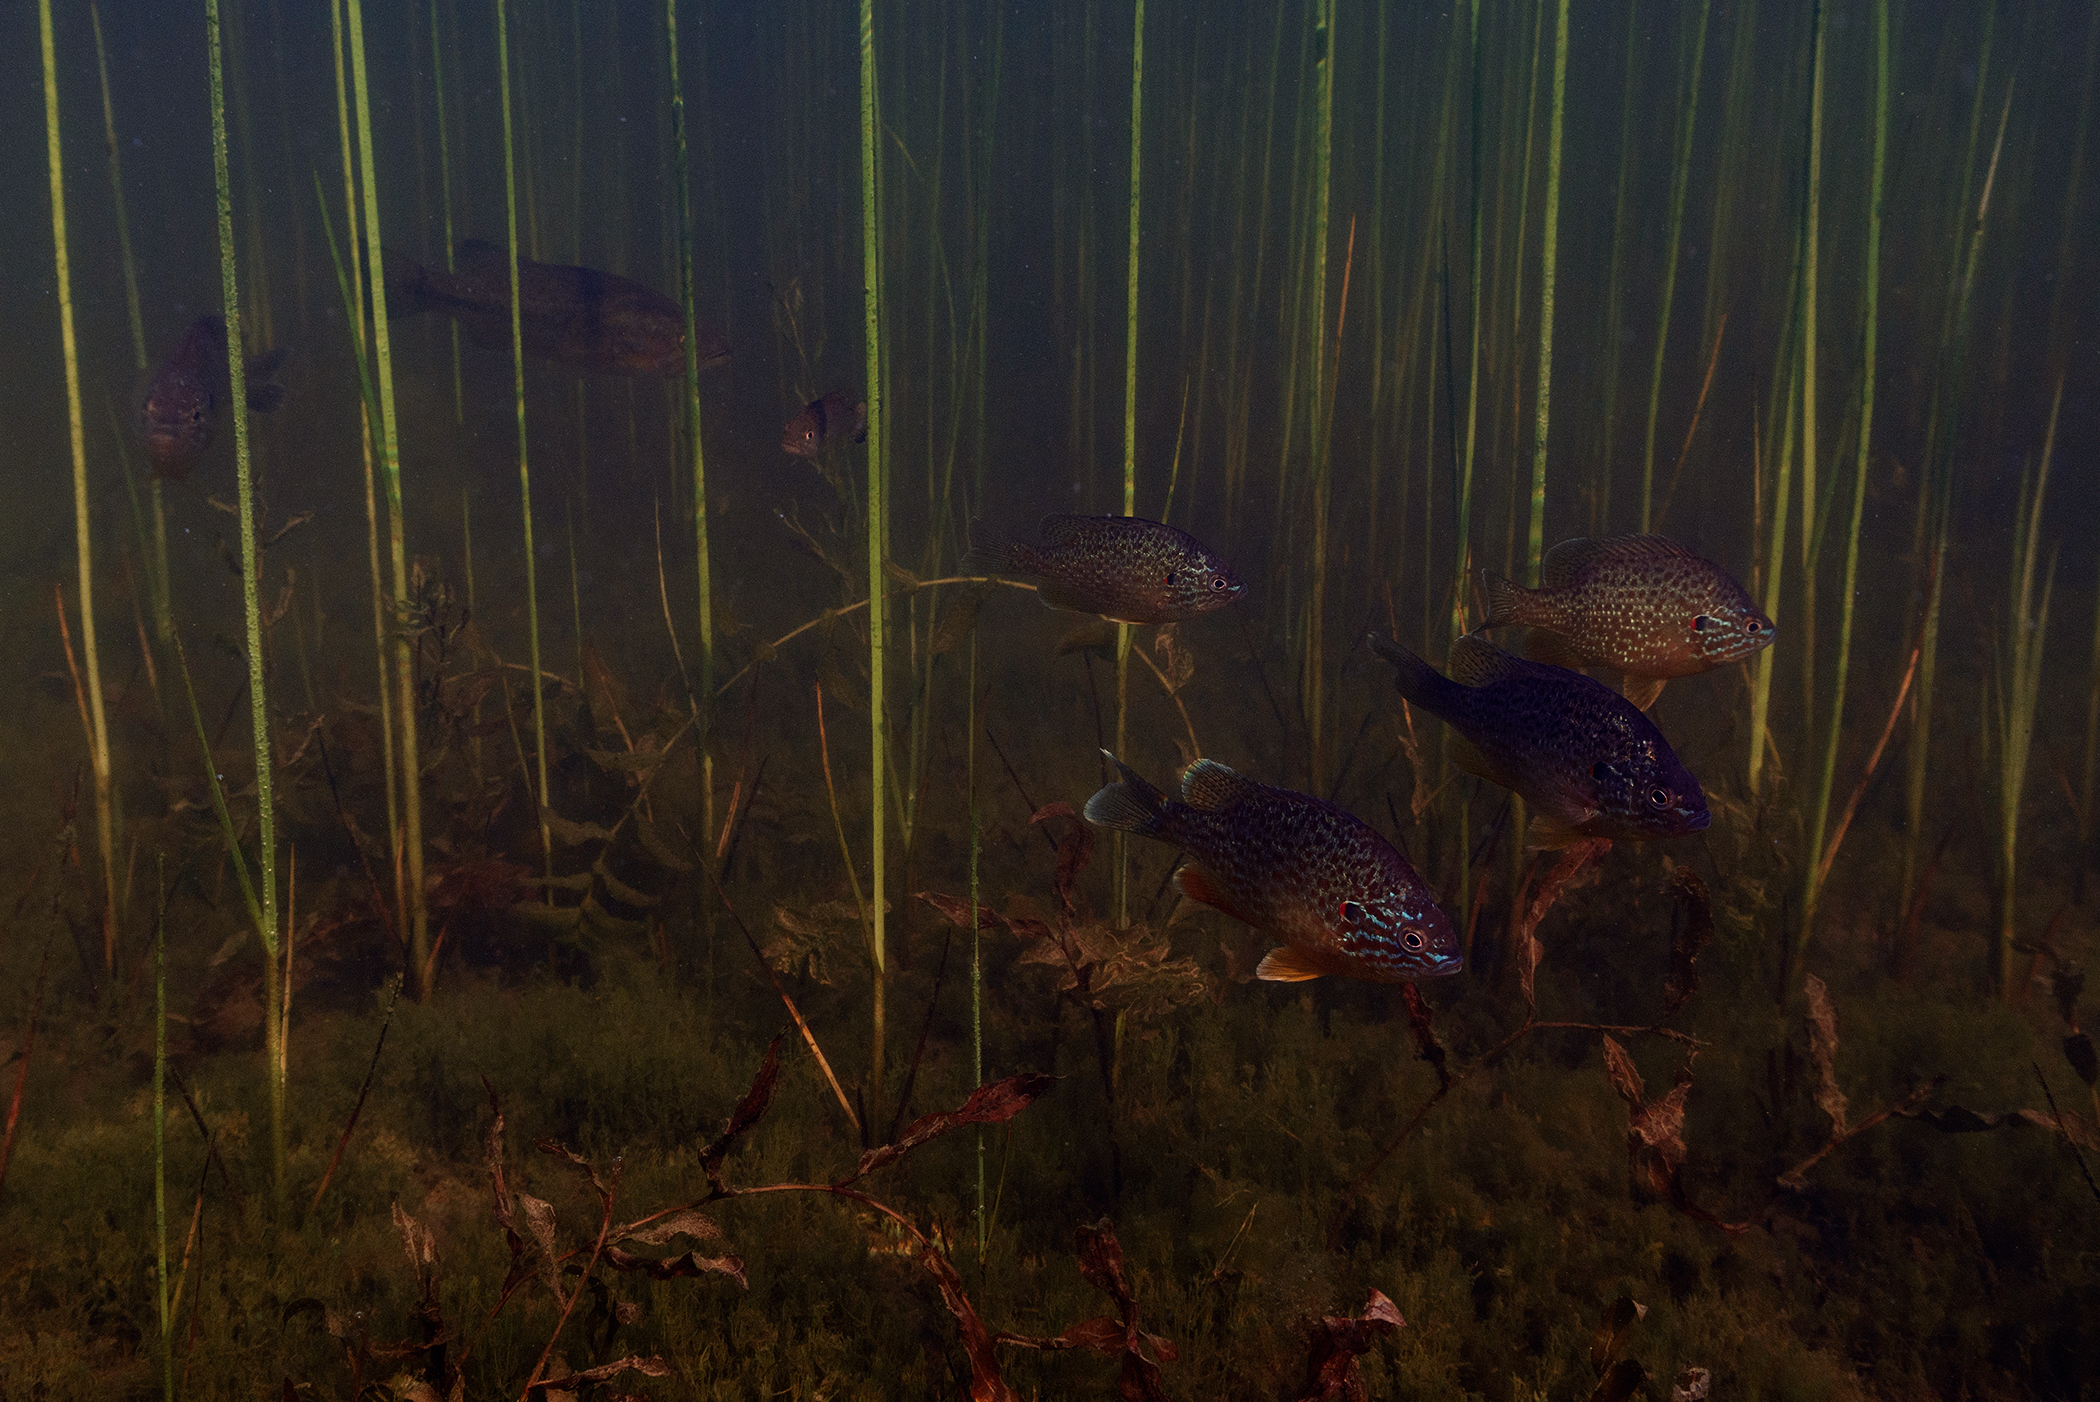 Underwater photo of reeds, seaweed and fish.